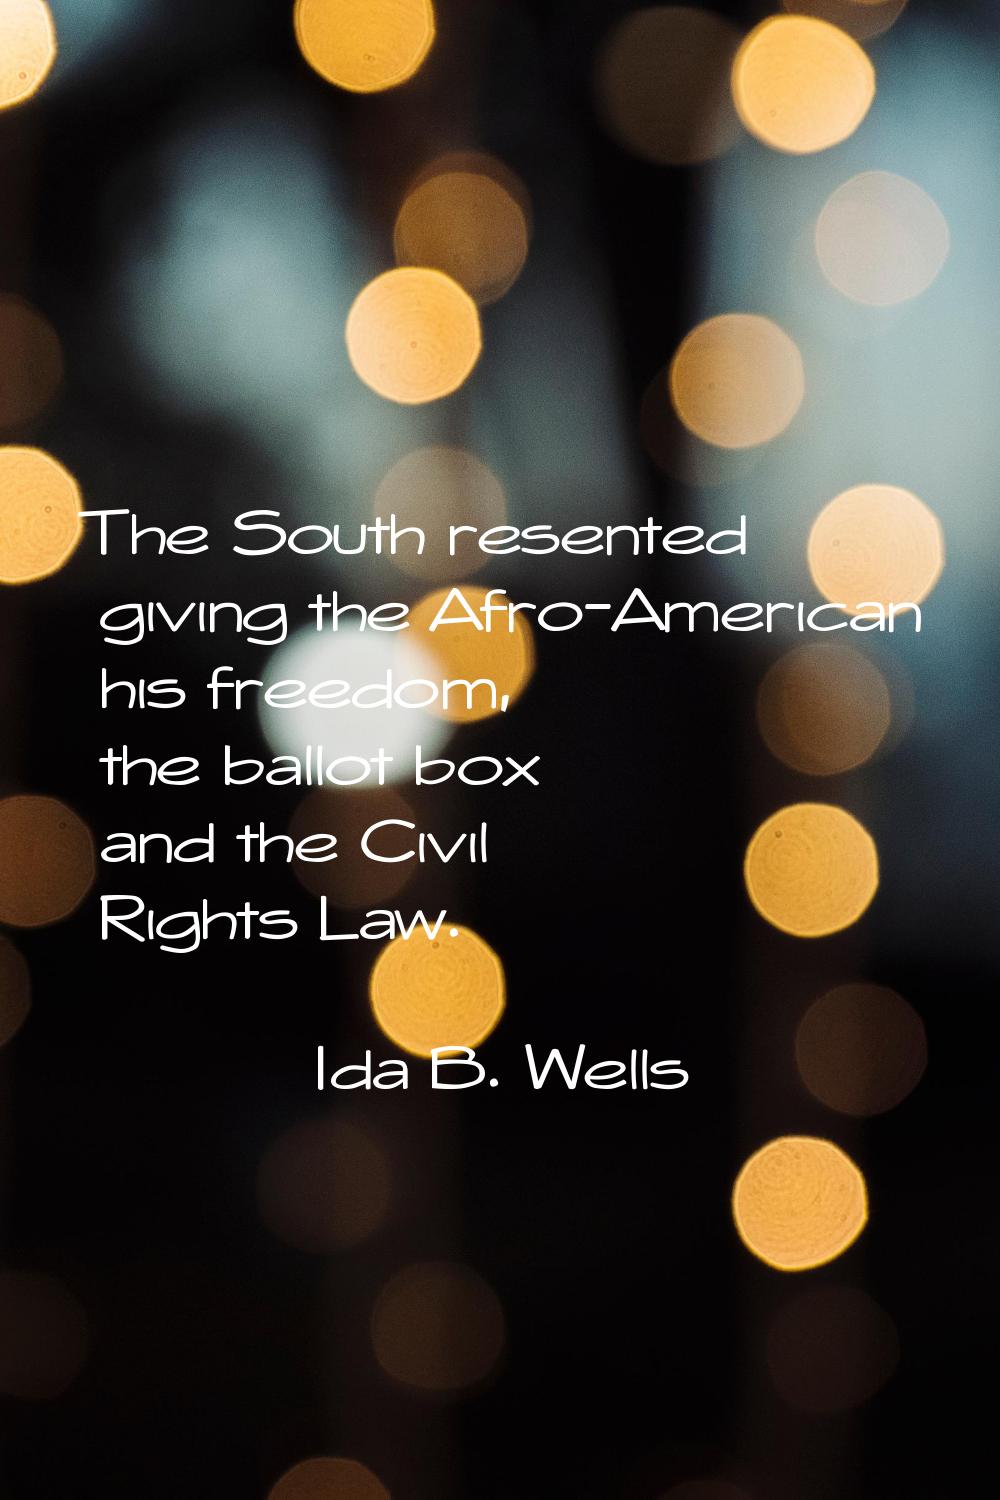 The South resented giving the Afro-American his freedom, the ballot box and the Civil Rights Law.